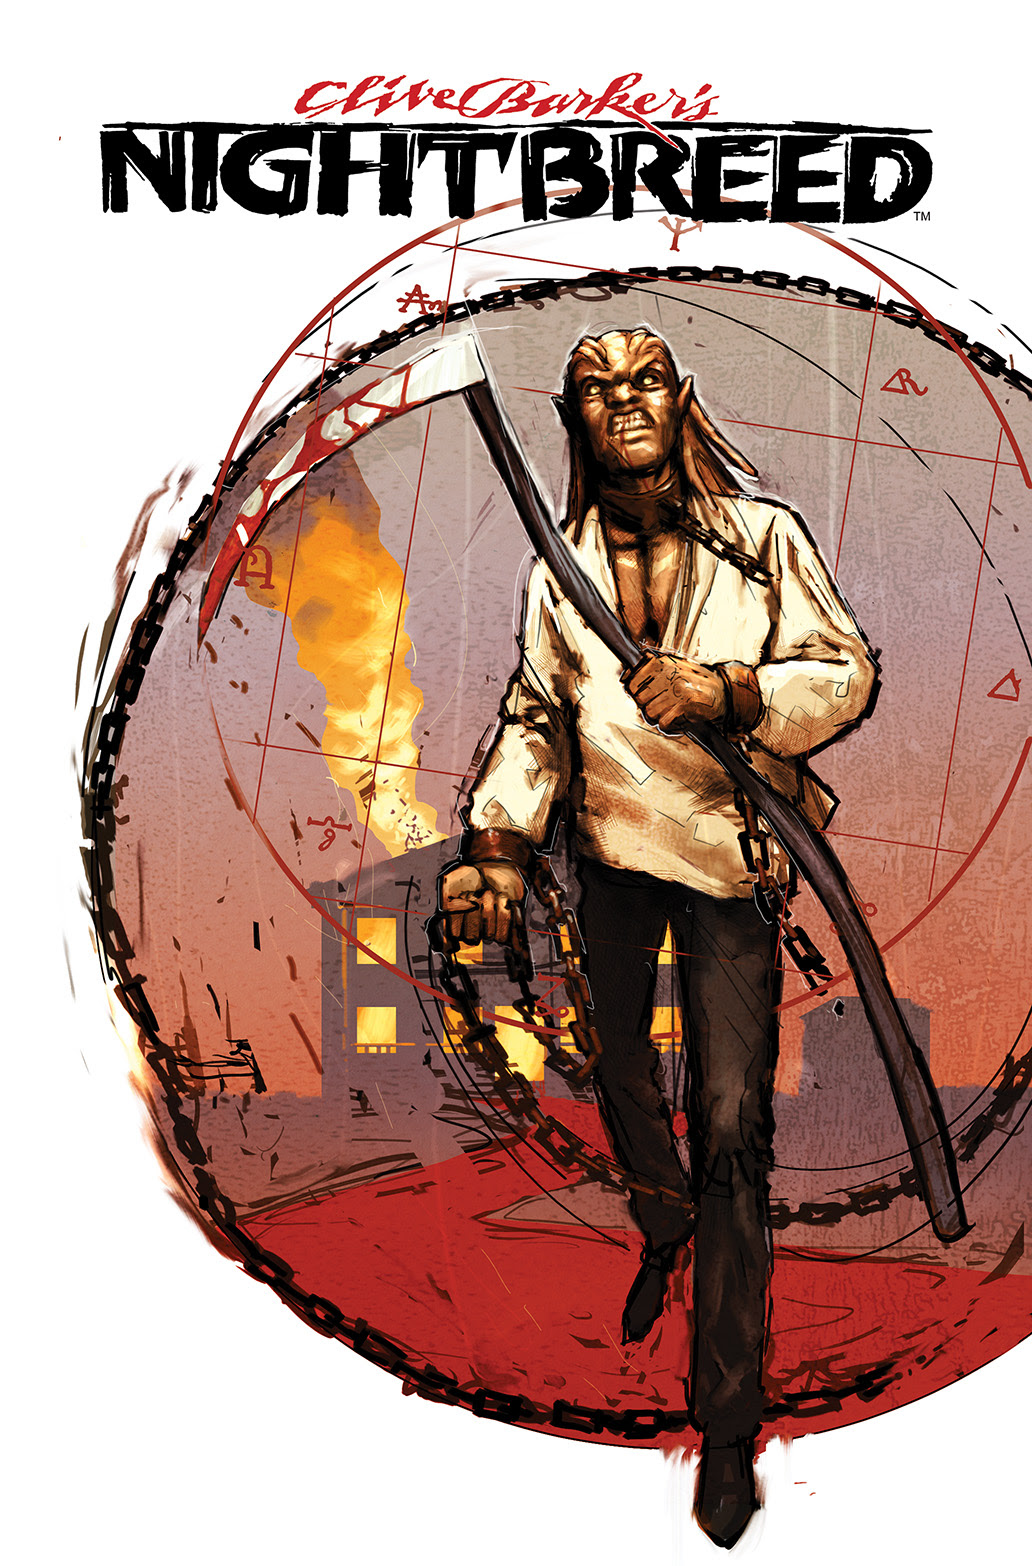 CLIVE BARKER'S NIGHTBREED #2 Cover A by Riley Rossmo